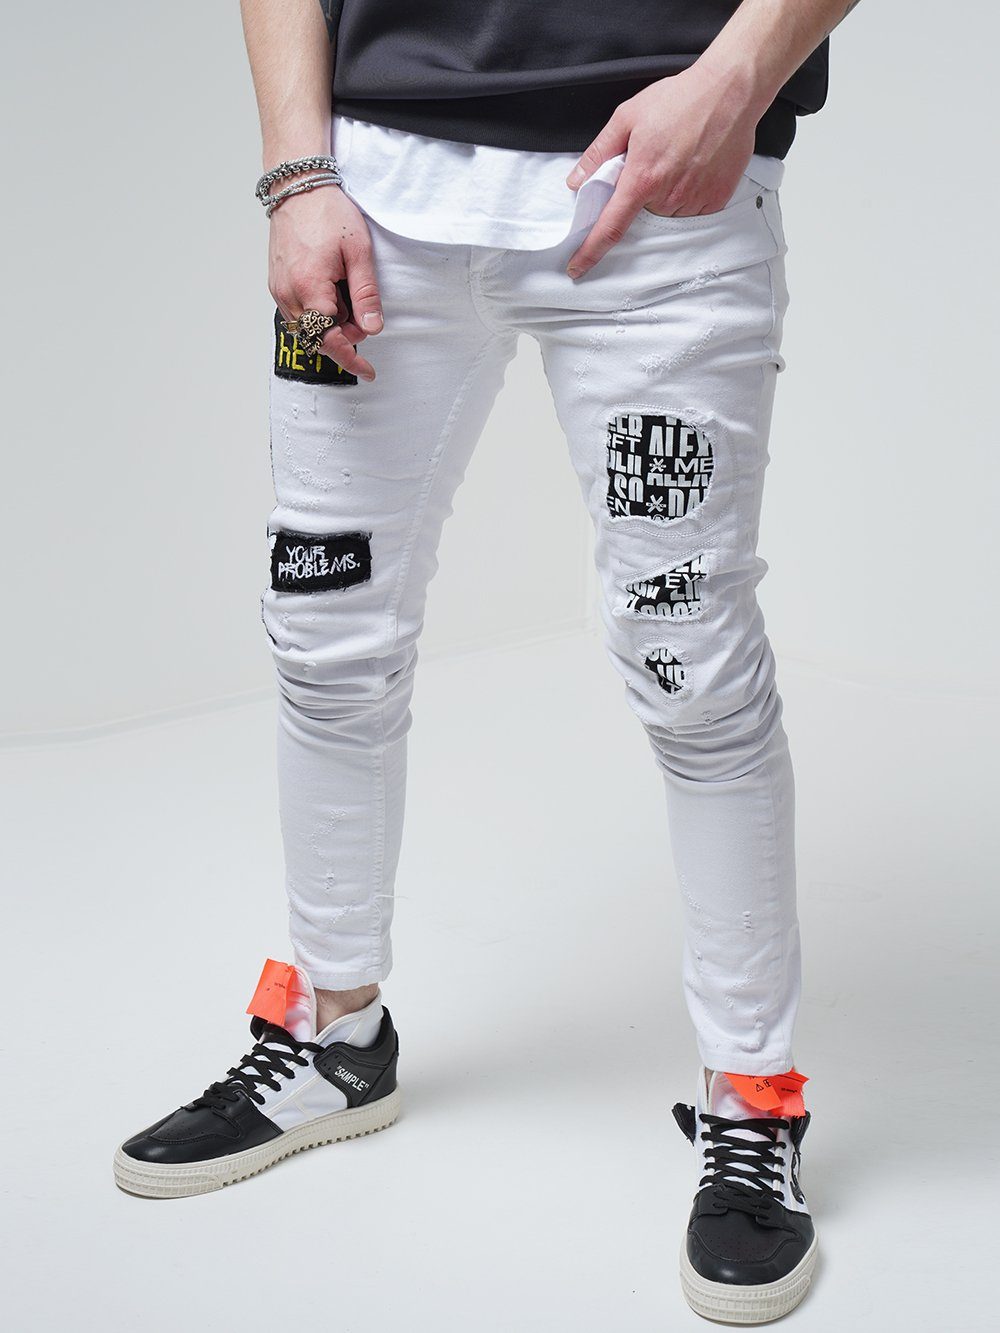 A man wearing WHITE FALCON jeans with patches on them.